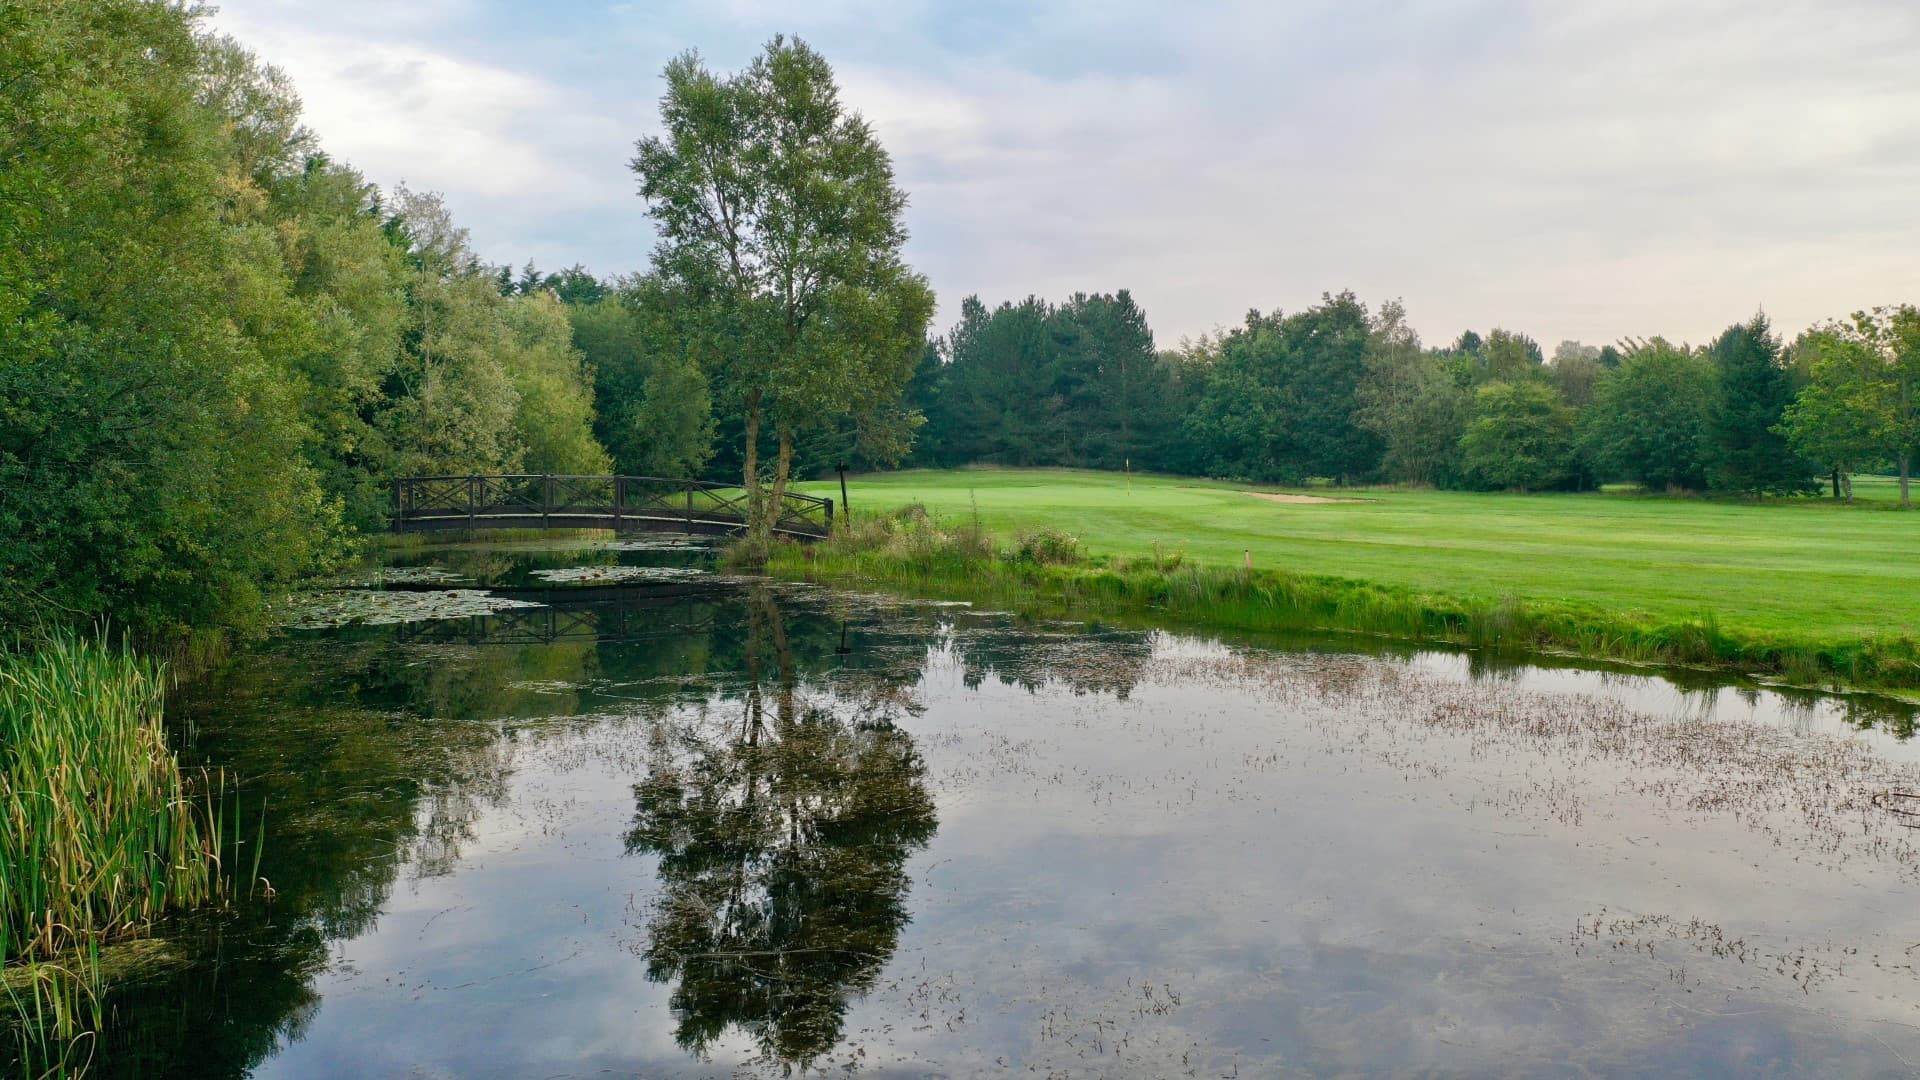 View of The Essex golf course and water feature